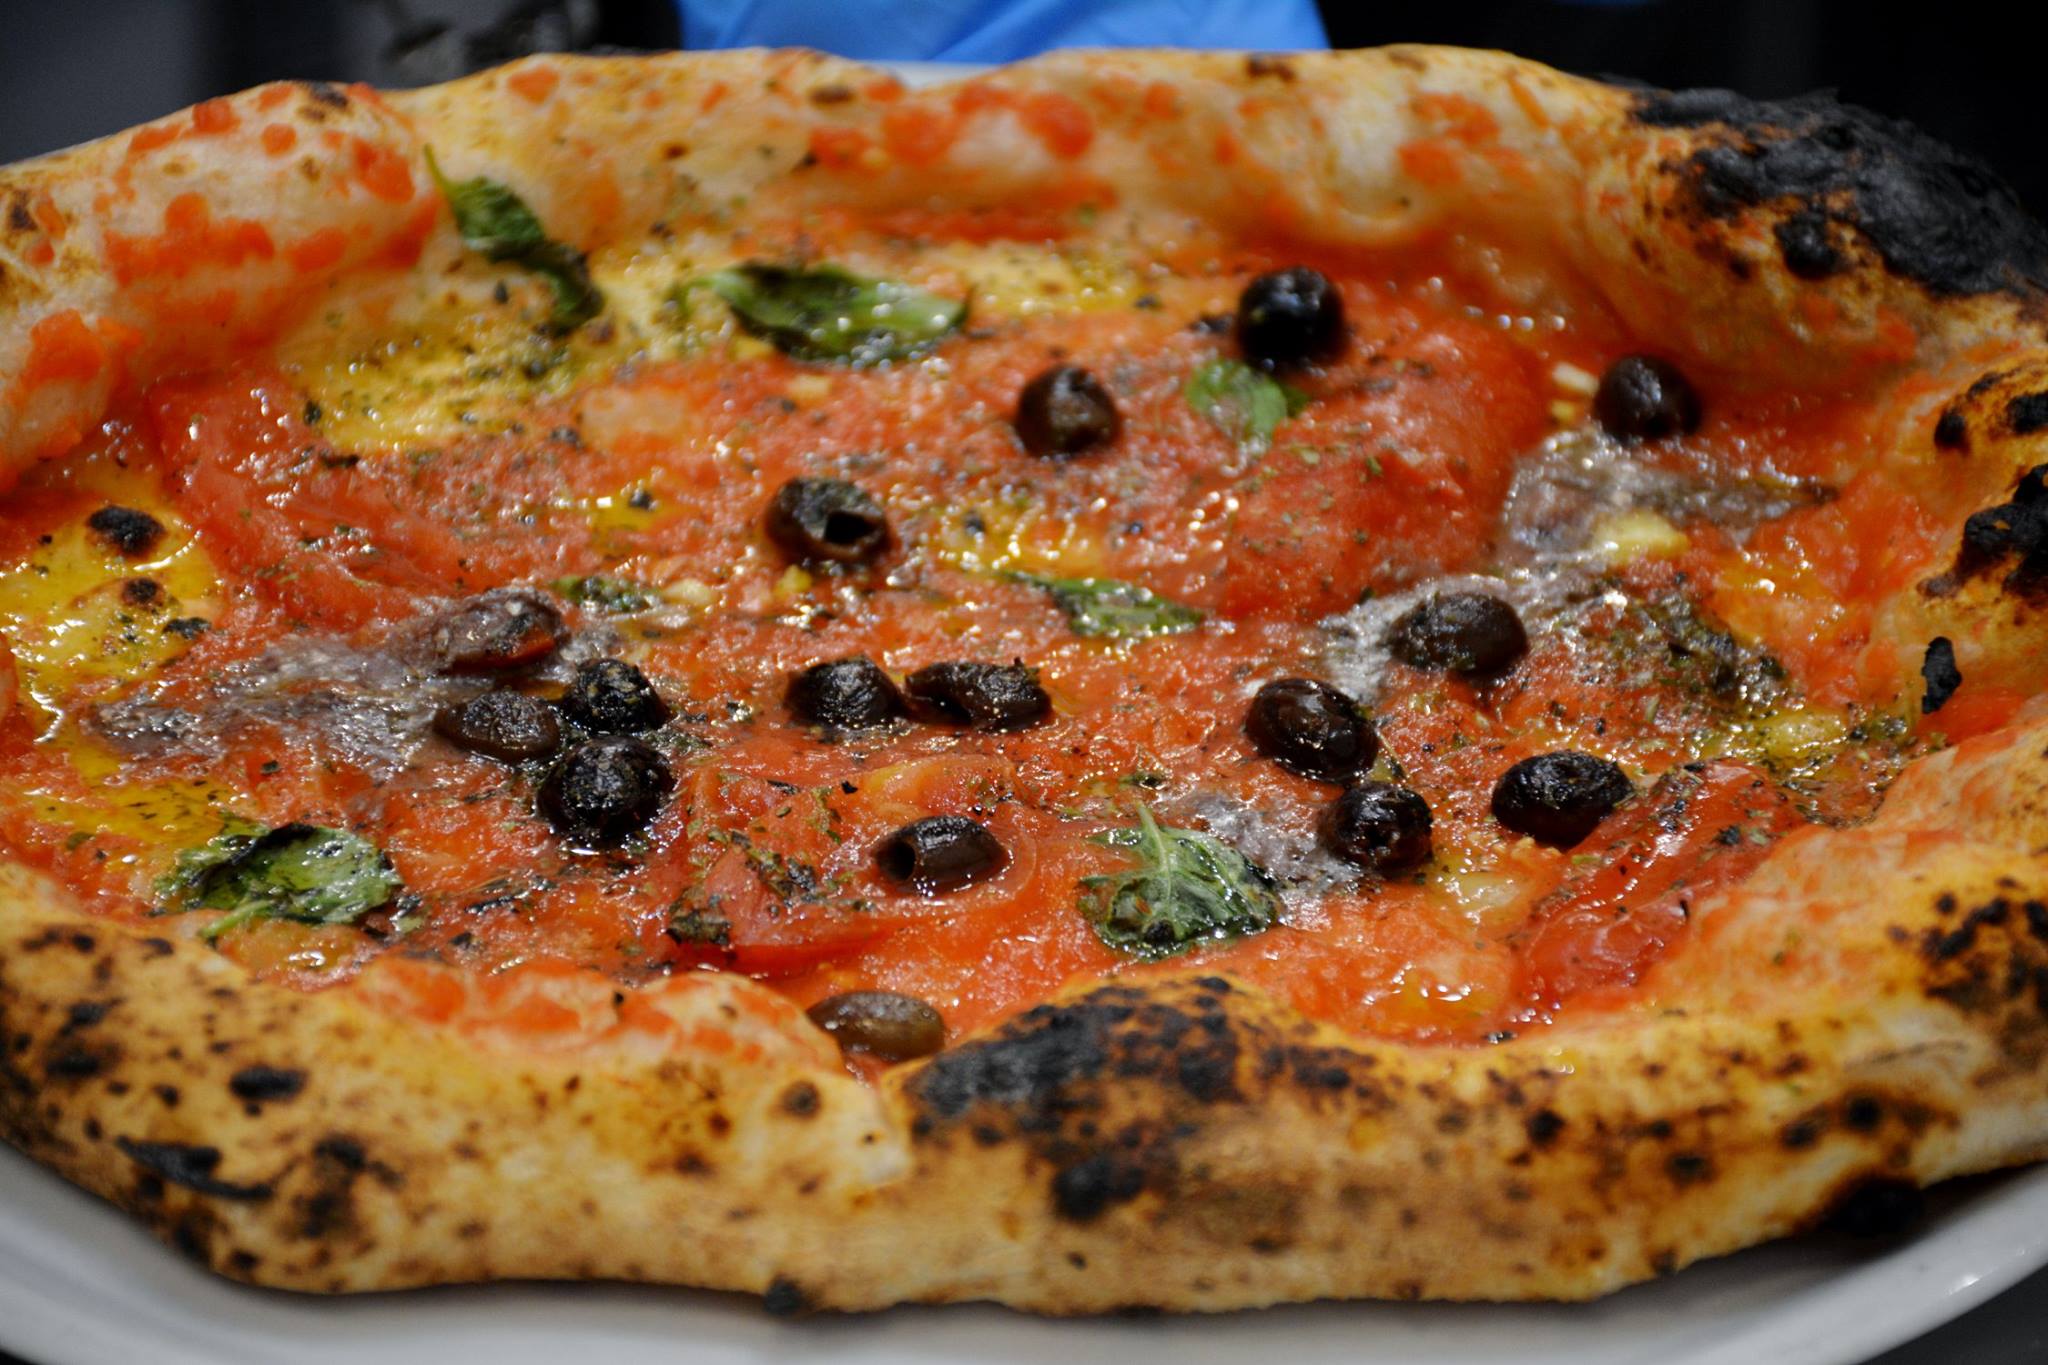 The Cilento pizza that is making Milan crazy